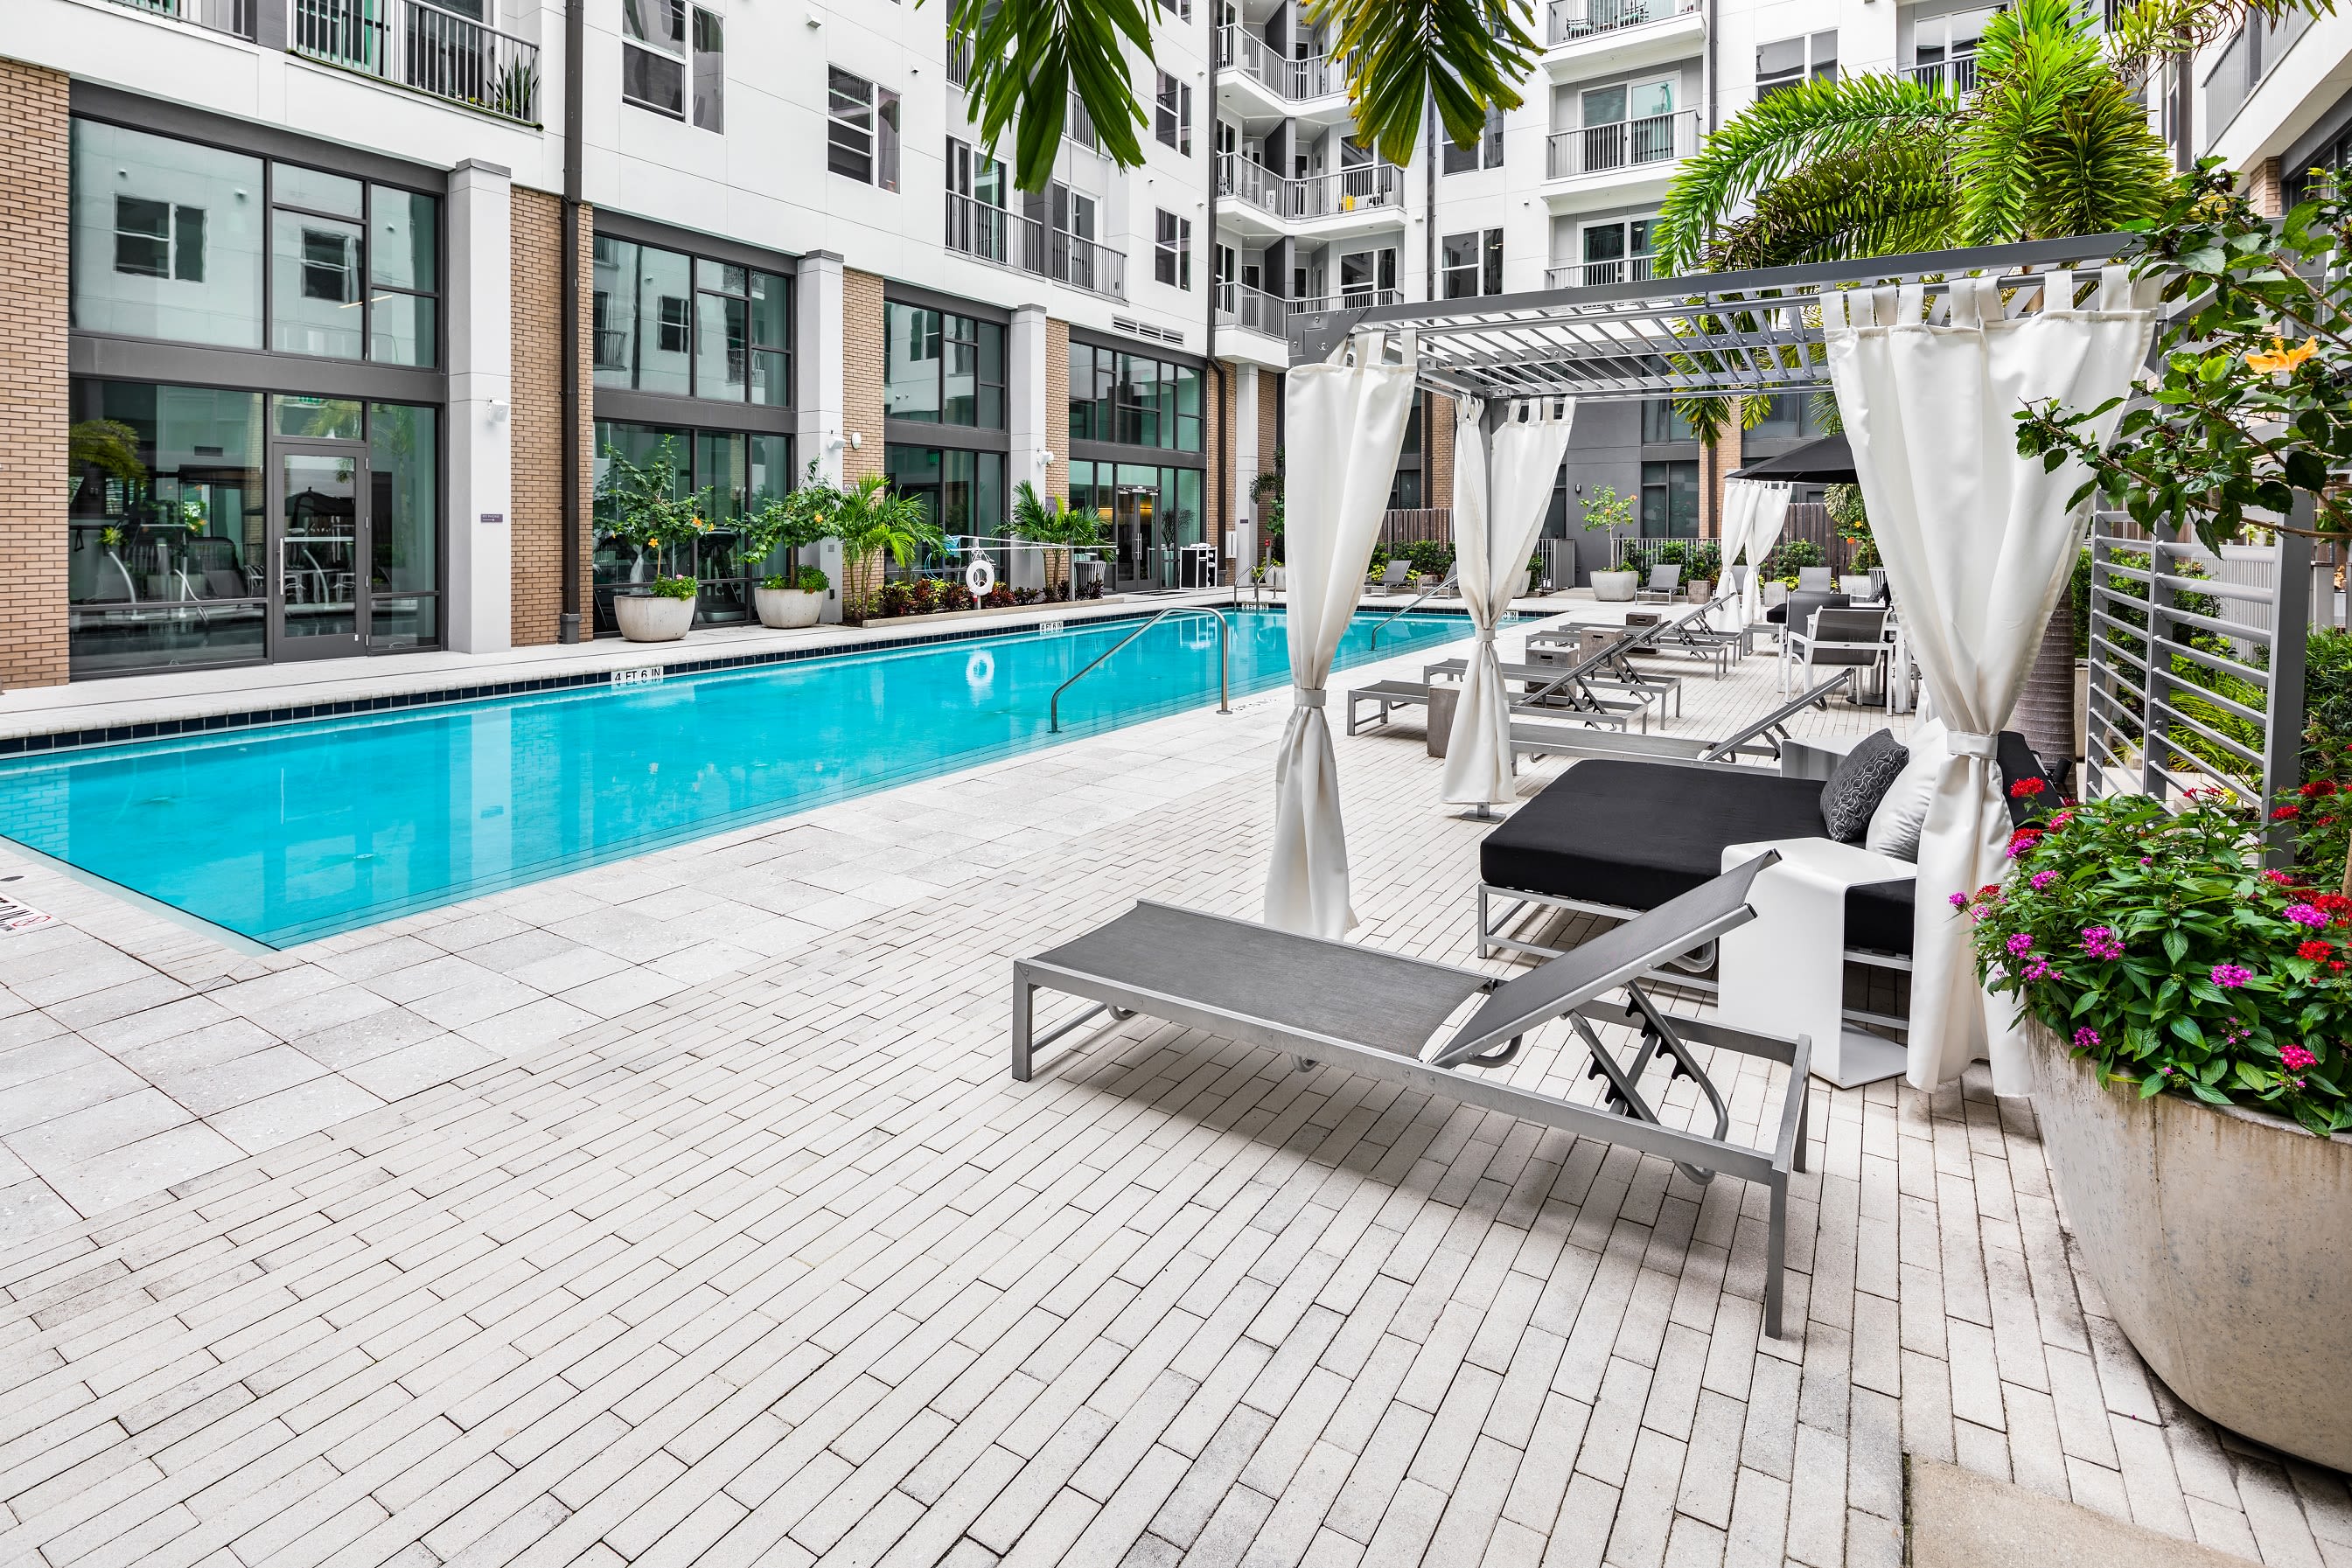 Large pool area with lounge furniture in at Central Station on Orange in Orlando, Florida